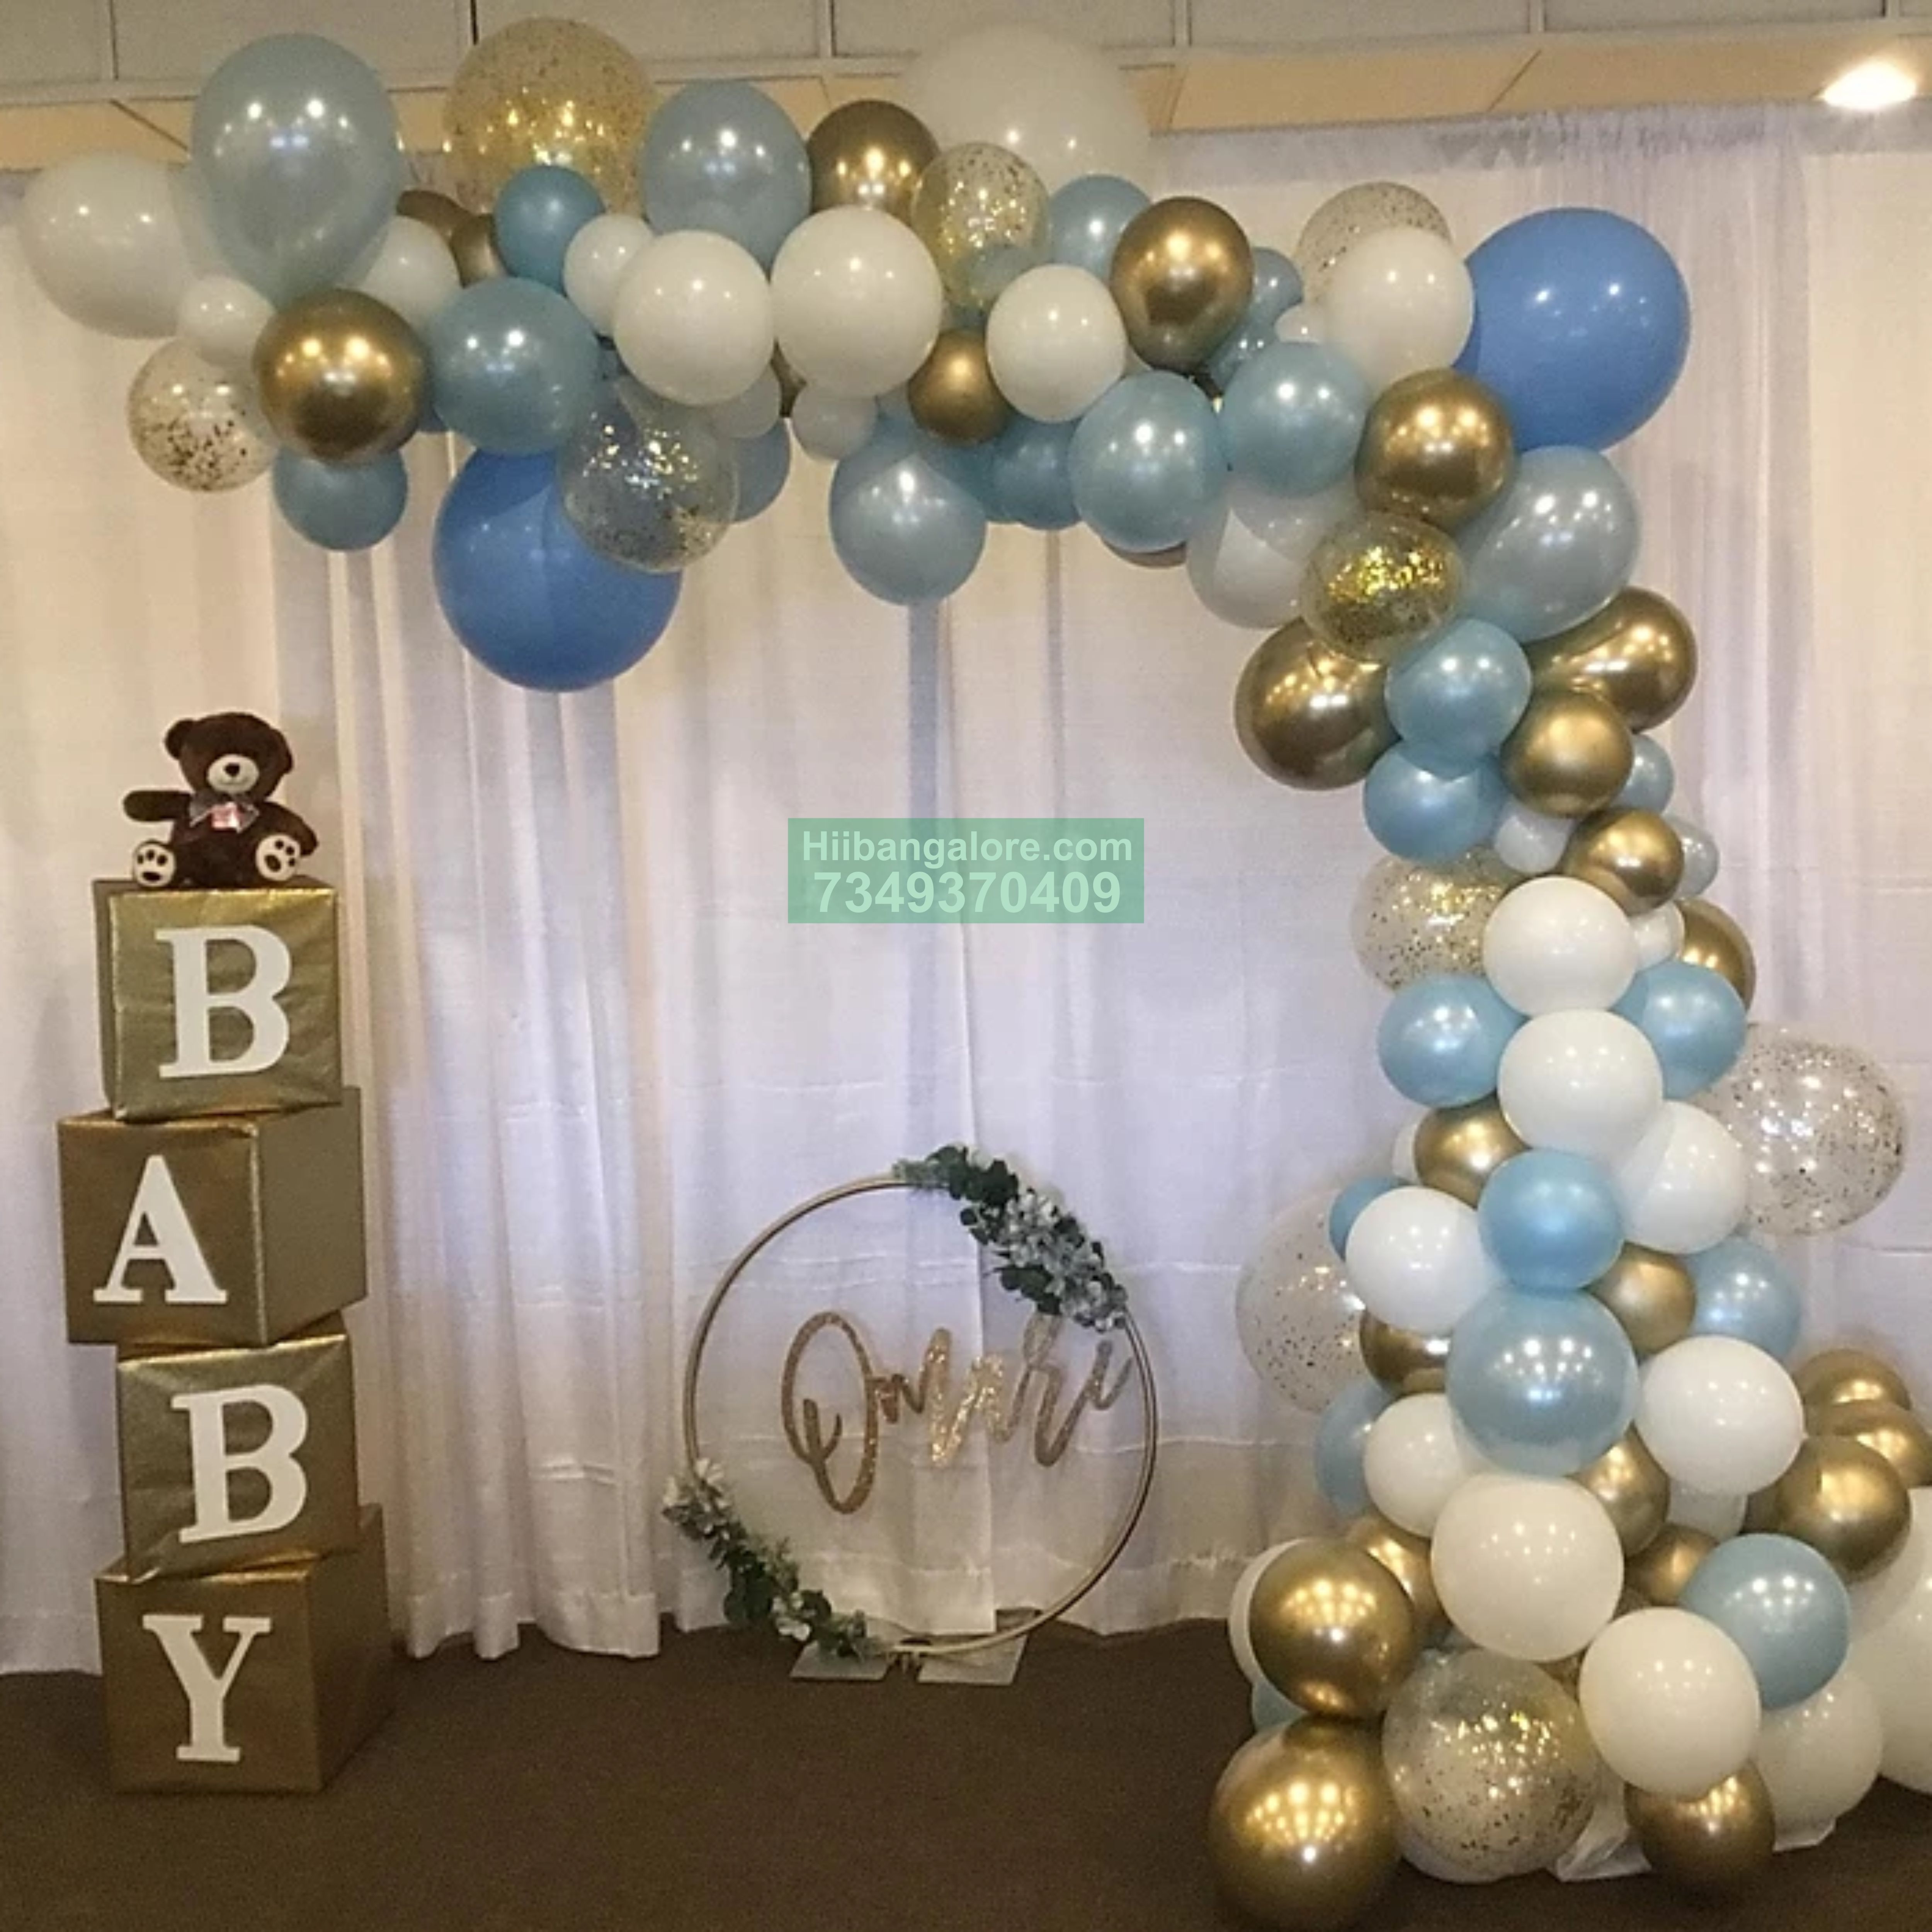 home balloon decorations - Best Birthday Party Organisers, Balloon ...